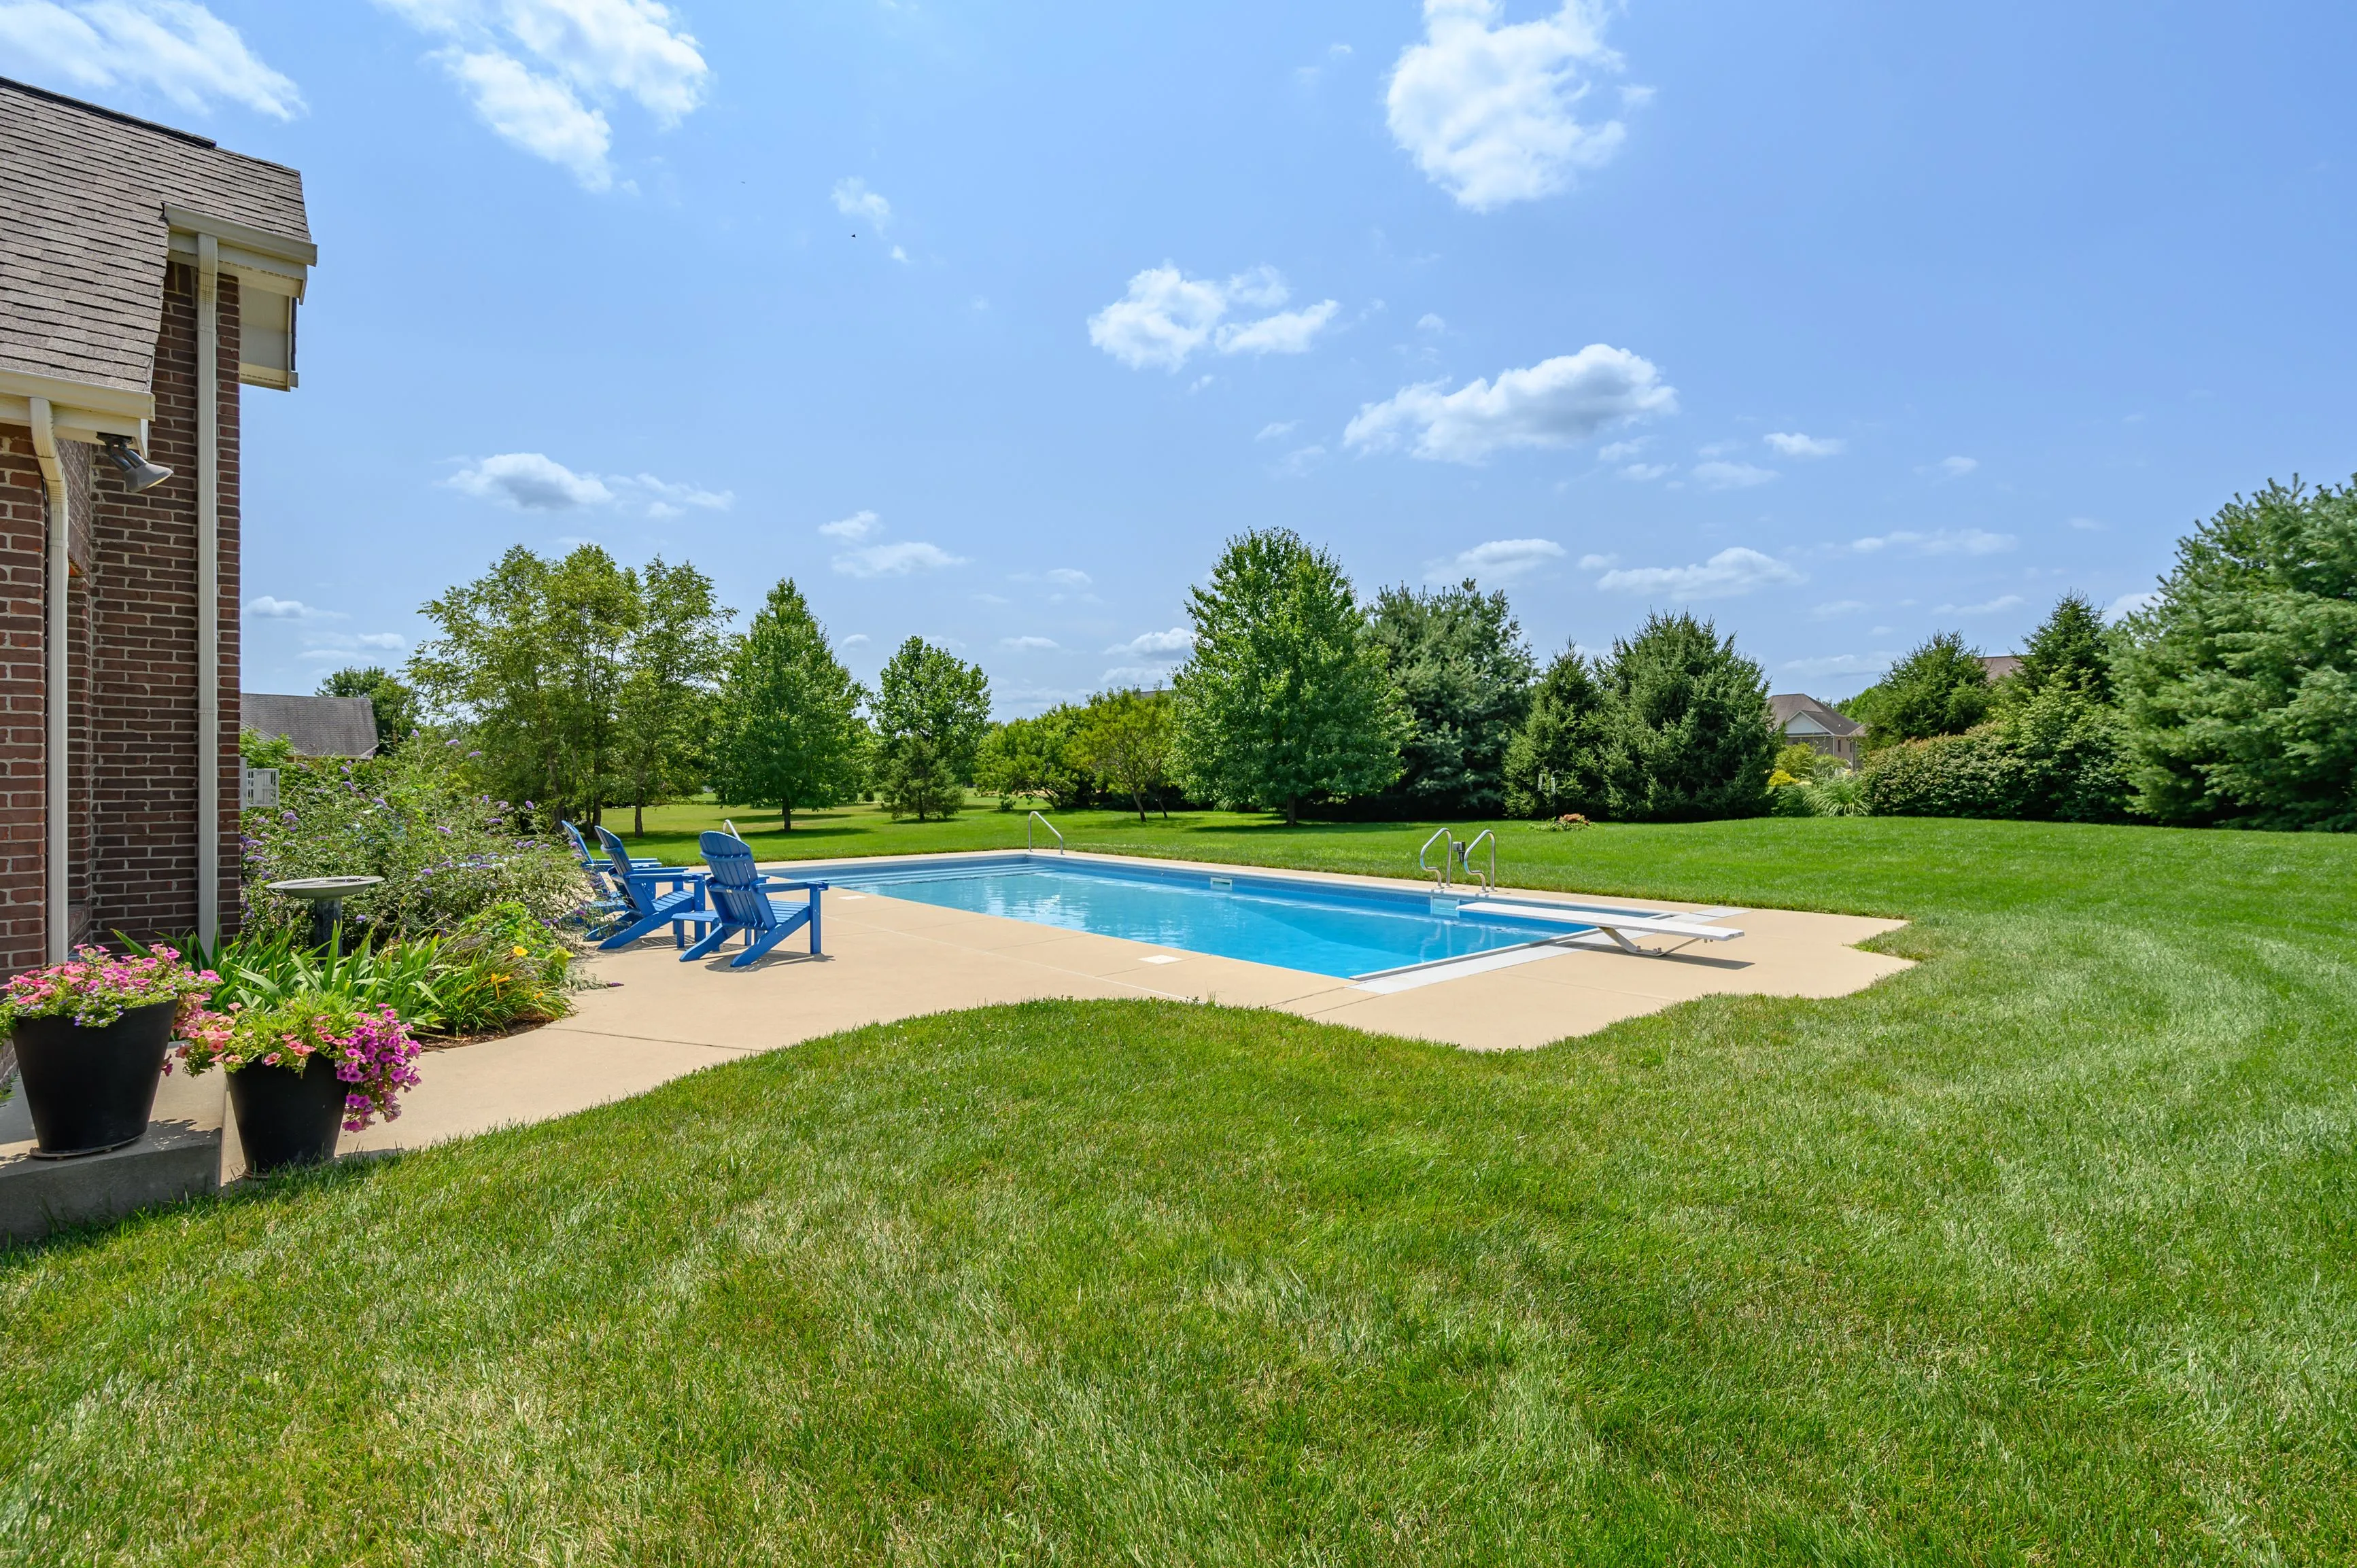 Backyard with a swimming pool, lounge chairs, and surrounding green lawn on a sunny day.